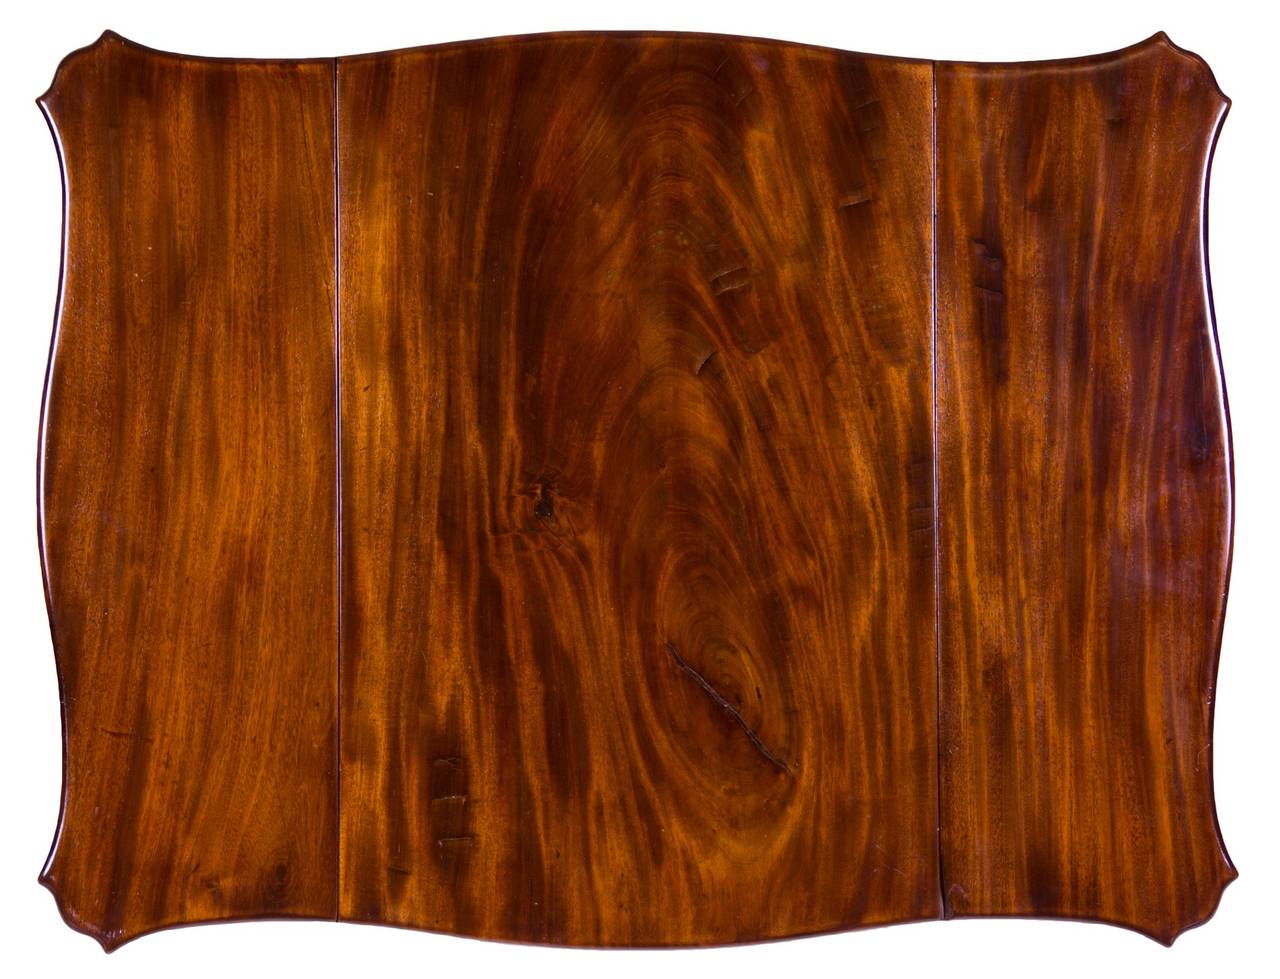 This piece is composed of the most vibrant figured mahogany. The leaves are beautifully shaped in a serpentine form with canted edges. There are no joined boards; all is of the solid. 

This piece is attributed to John Shaw and there are several